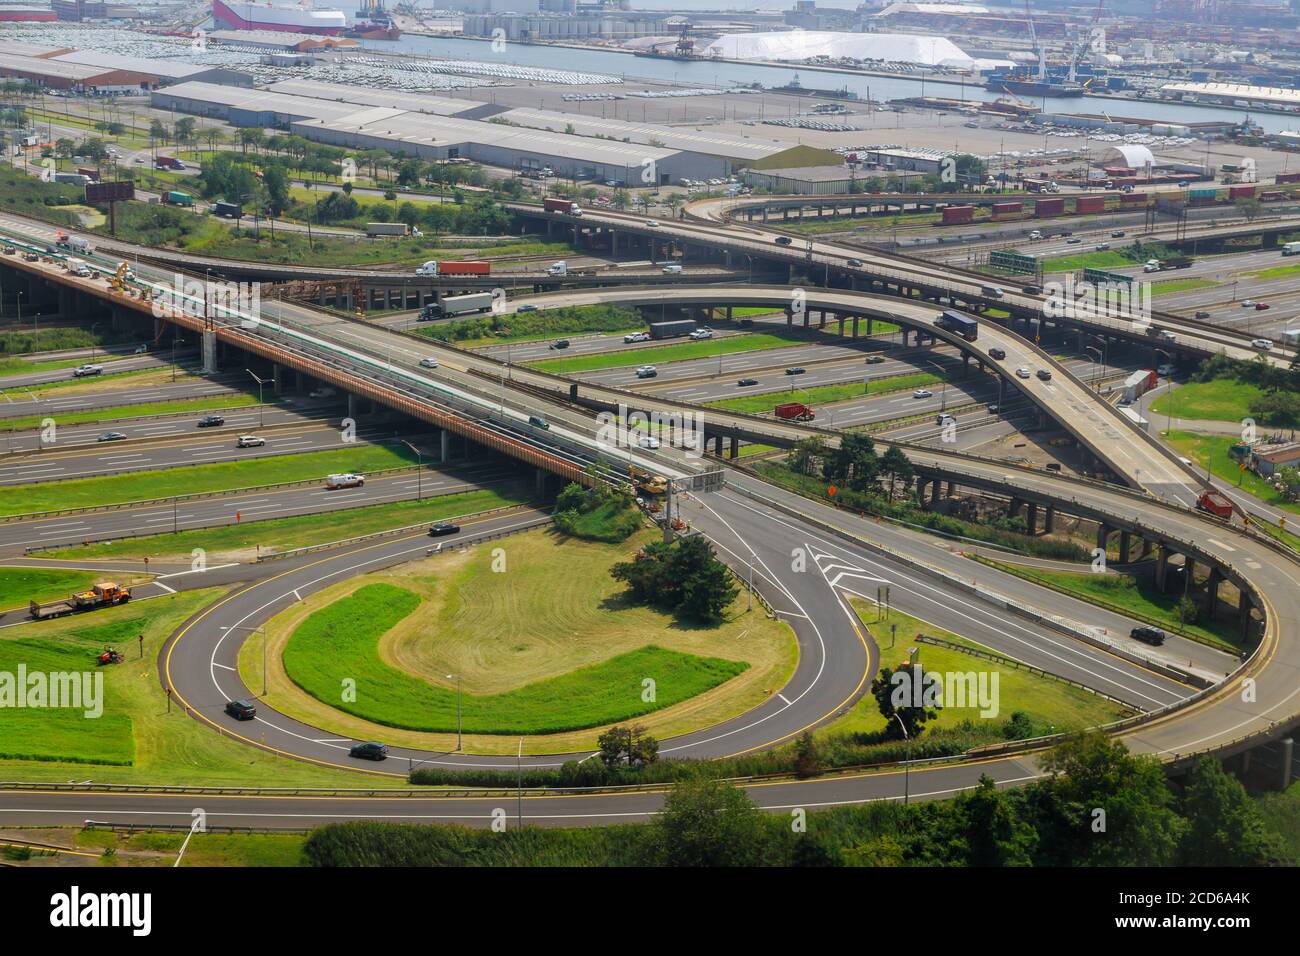 Aerial view at junctions of city highway vehicles drive on roads Newark NJ US Stock Photo